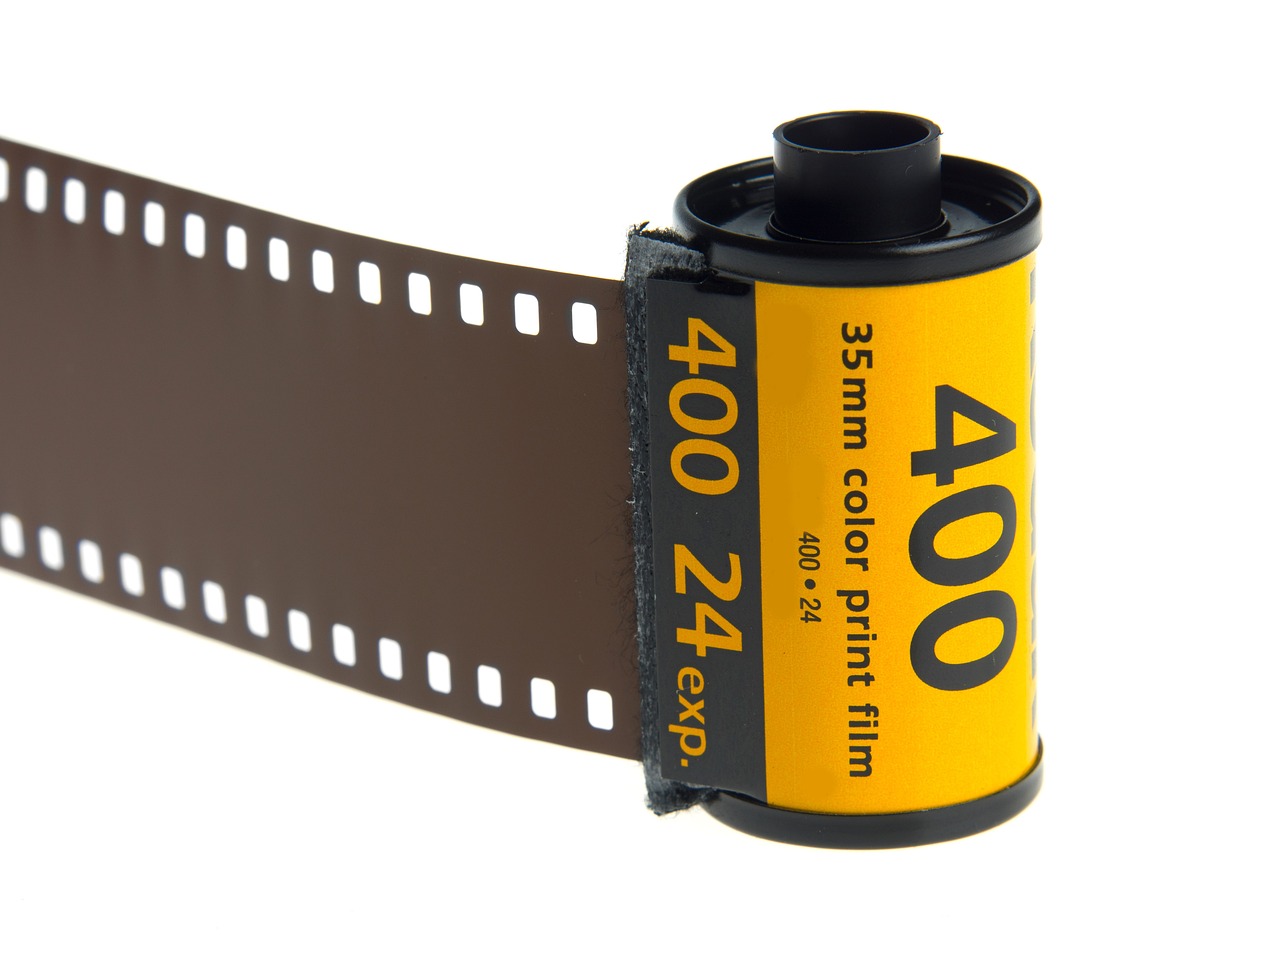 Different types of 35mm camera film